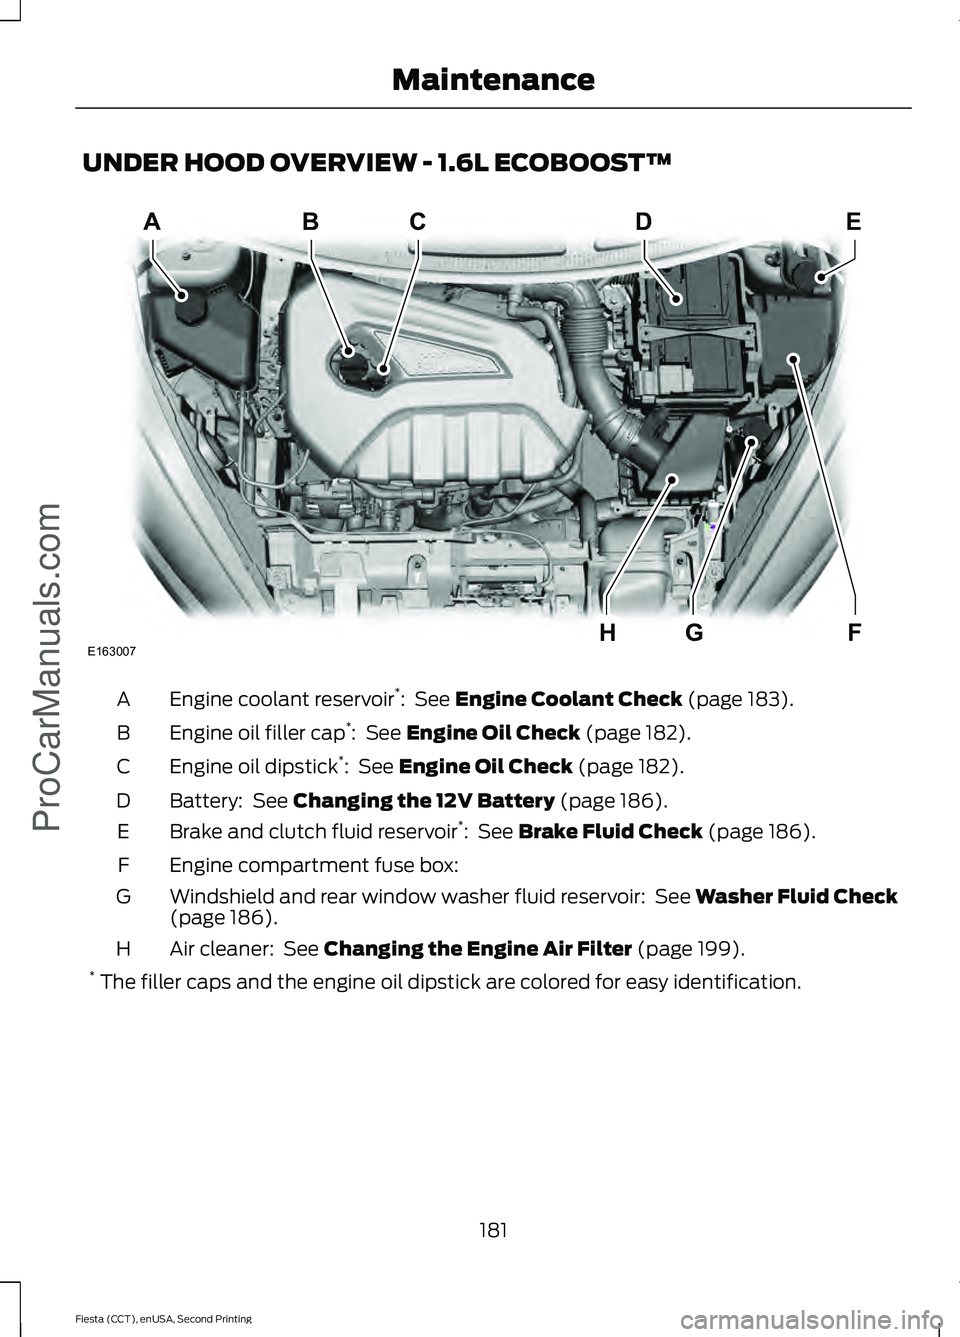 FORD FIESTA 2015  Owners Manual UNDER HOOD OVERVIEW - 1.6L ECOBOOST™
Engine coolant reservoir
*
:  See Engine Coolant Check (page 183).
A
Engine oil filler cap *
: 
 See Engine Oil Check (page 182).
B
Engine oil dipstick *
: 
 See